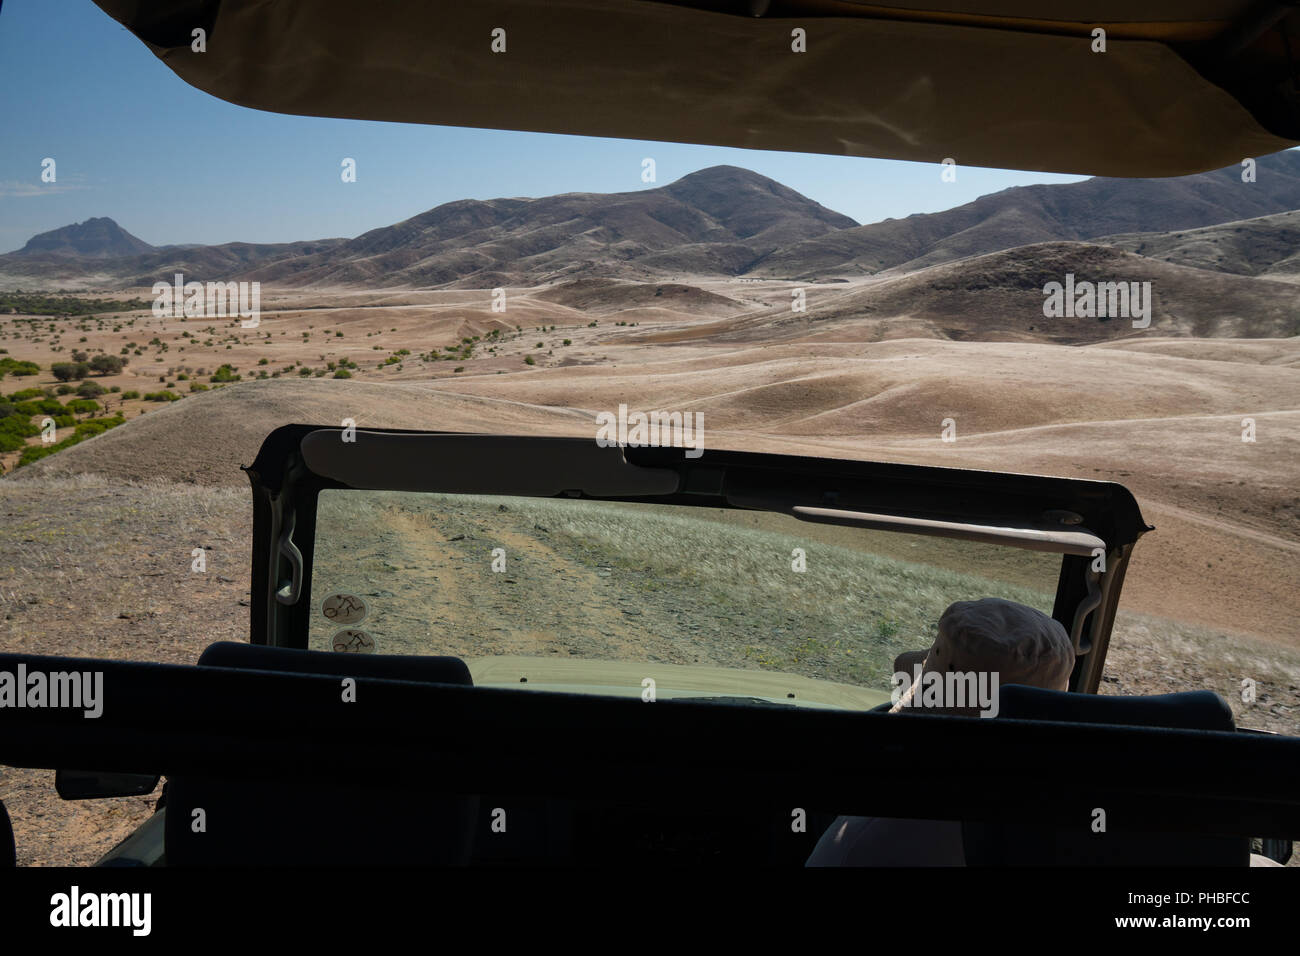 View over Hoarusib Riverbed from inside a safari vehicle, mountain range in background, Puros, north of Sesfontein, Nambia, Africa Stock Photo